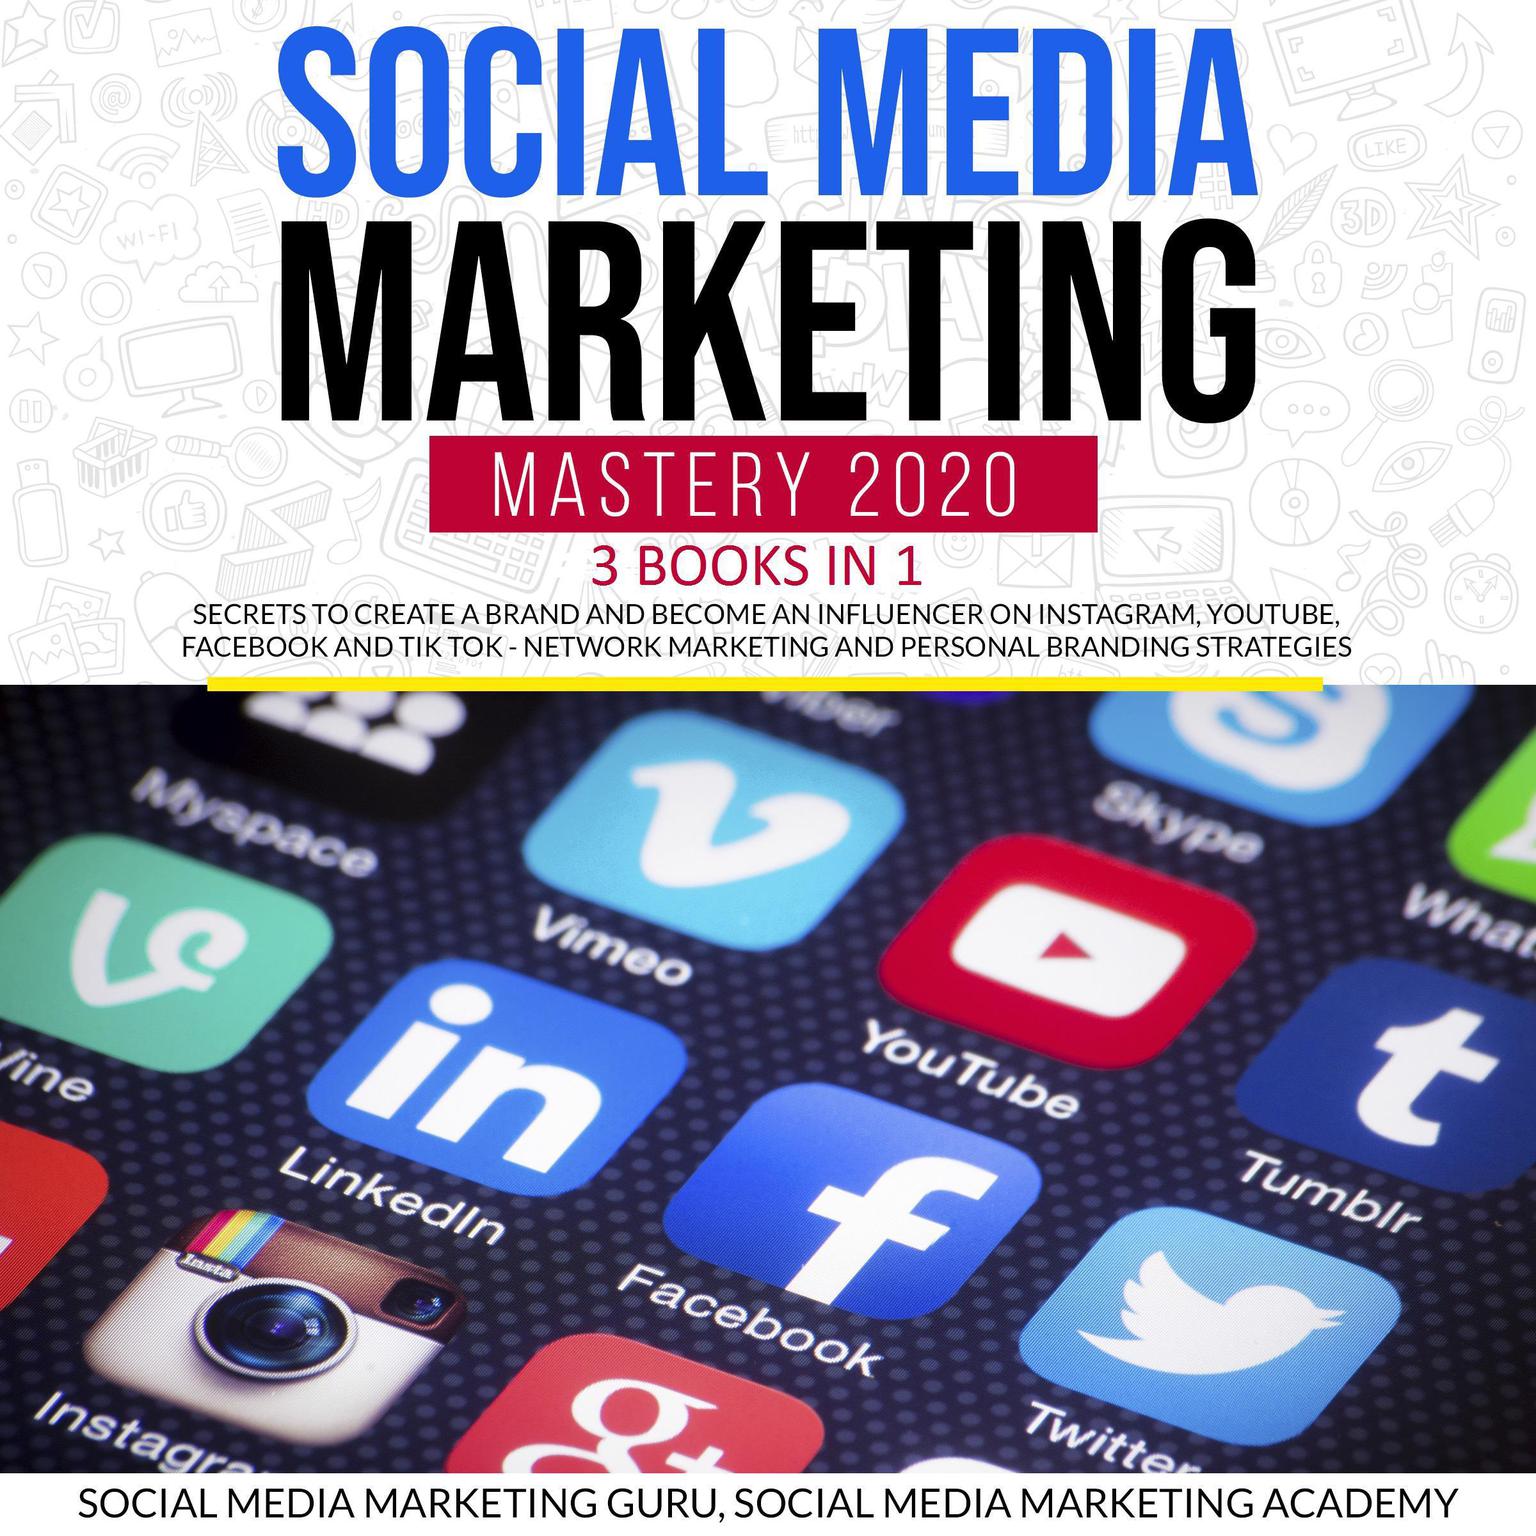 Social Media Marketing Mastery 2020 3 Books in 1: Secrets to Create a Brand and Become an Influencer on Instagram, Youtube, Facebook, and Tik Tok, Network Marketing and Personal Branding Strategies Audiobook, by Social Media Marketing Academy